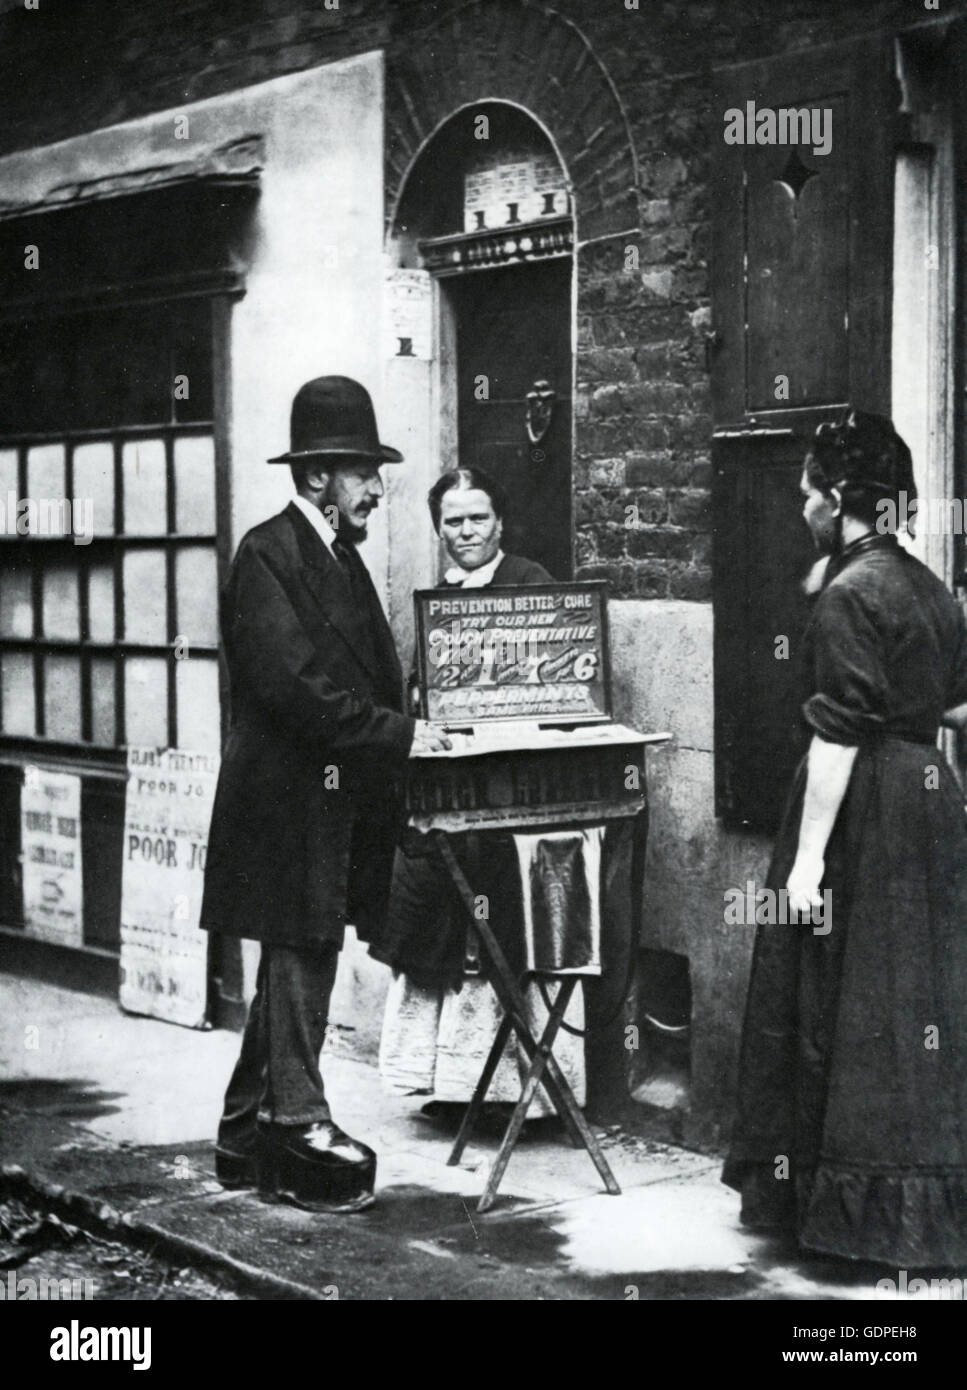 LONDON STREET PEDDLER in platform shoes shows off his cough medicines about 1862 in a poor area. The poster at left advertises a showing of 'Poor Joe' and other works by pioneering photographer Oscar Rejlander  at the Glass Theatre Stock Photo